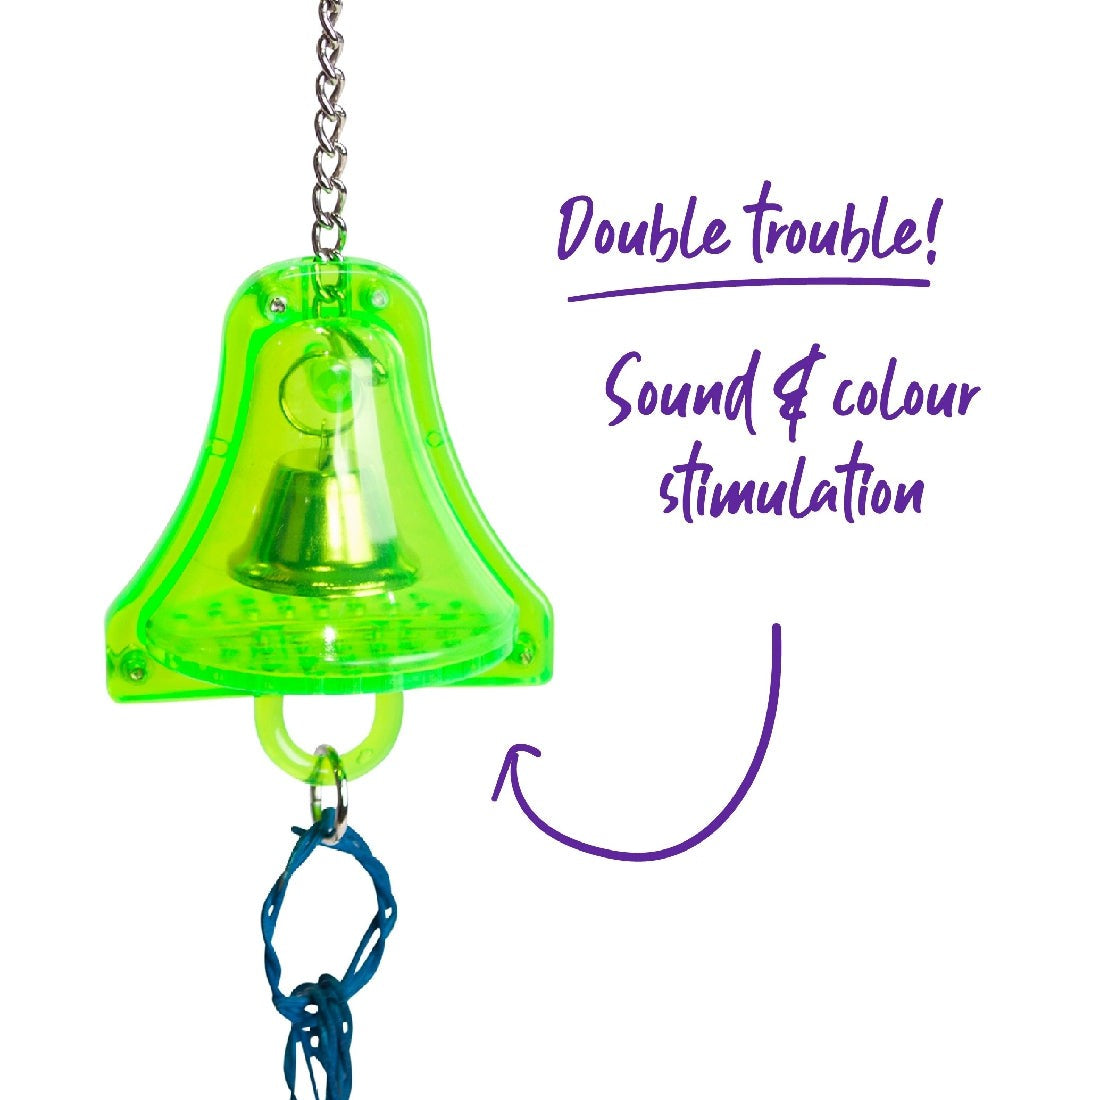 Green bell-shaped bird toy with chain and sound and color stimulation text.